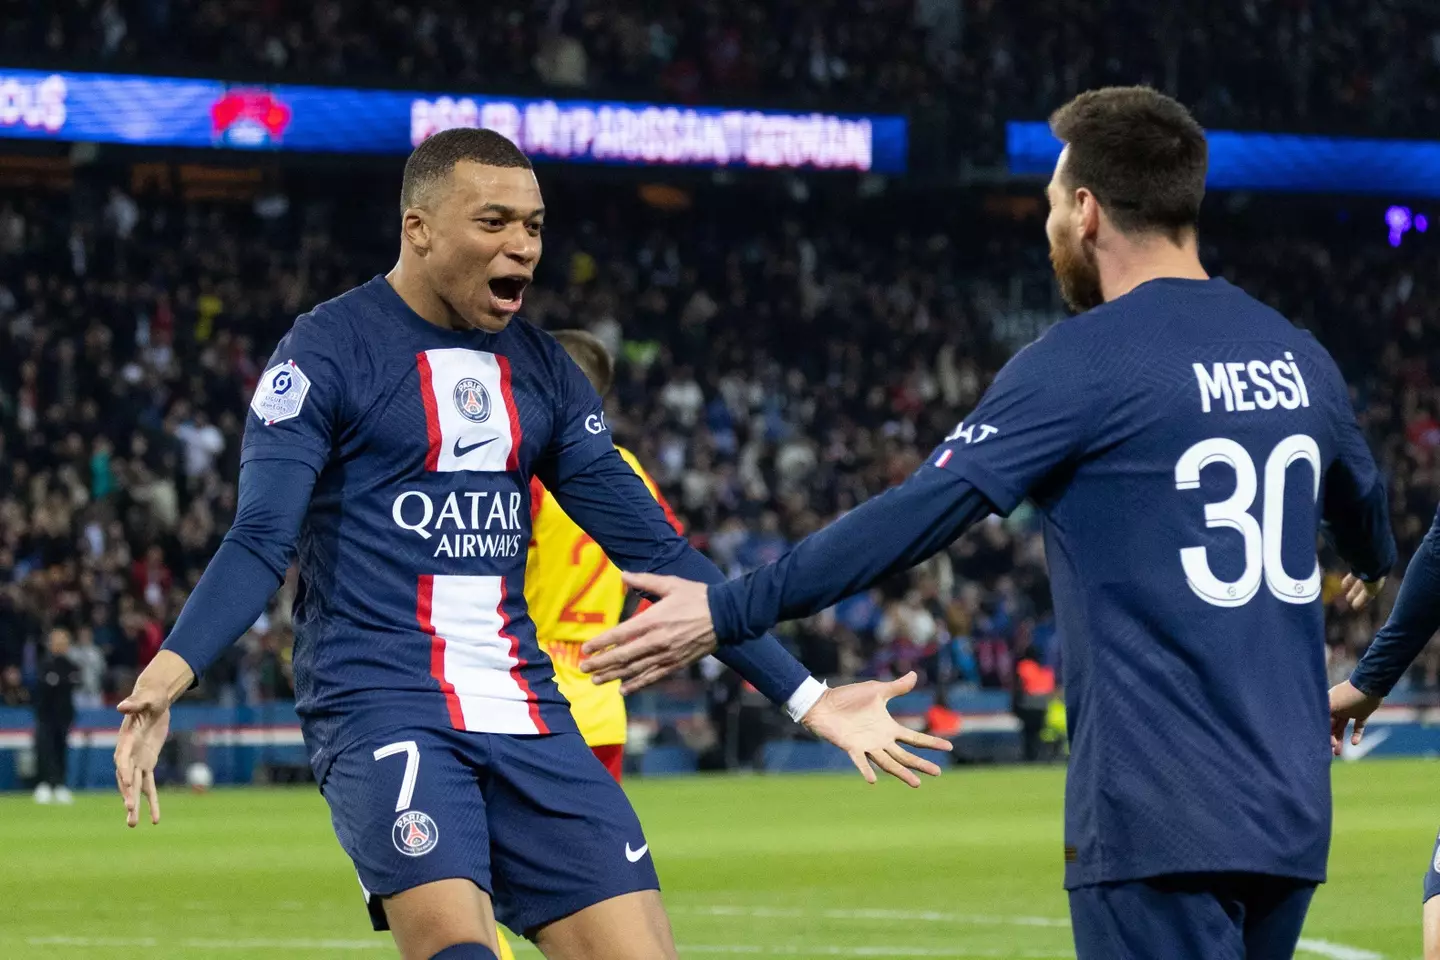 Messi and PSG had a much better night not being booed. Image: Alamy